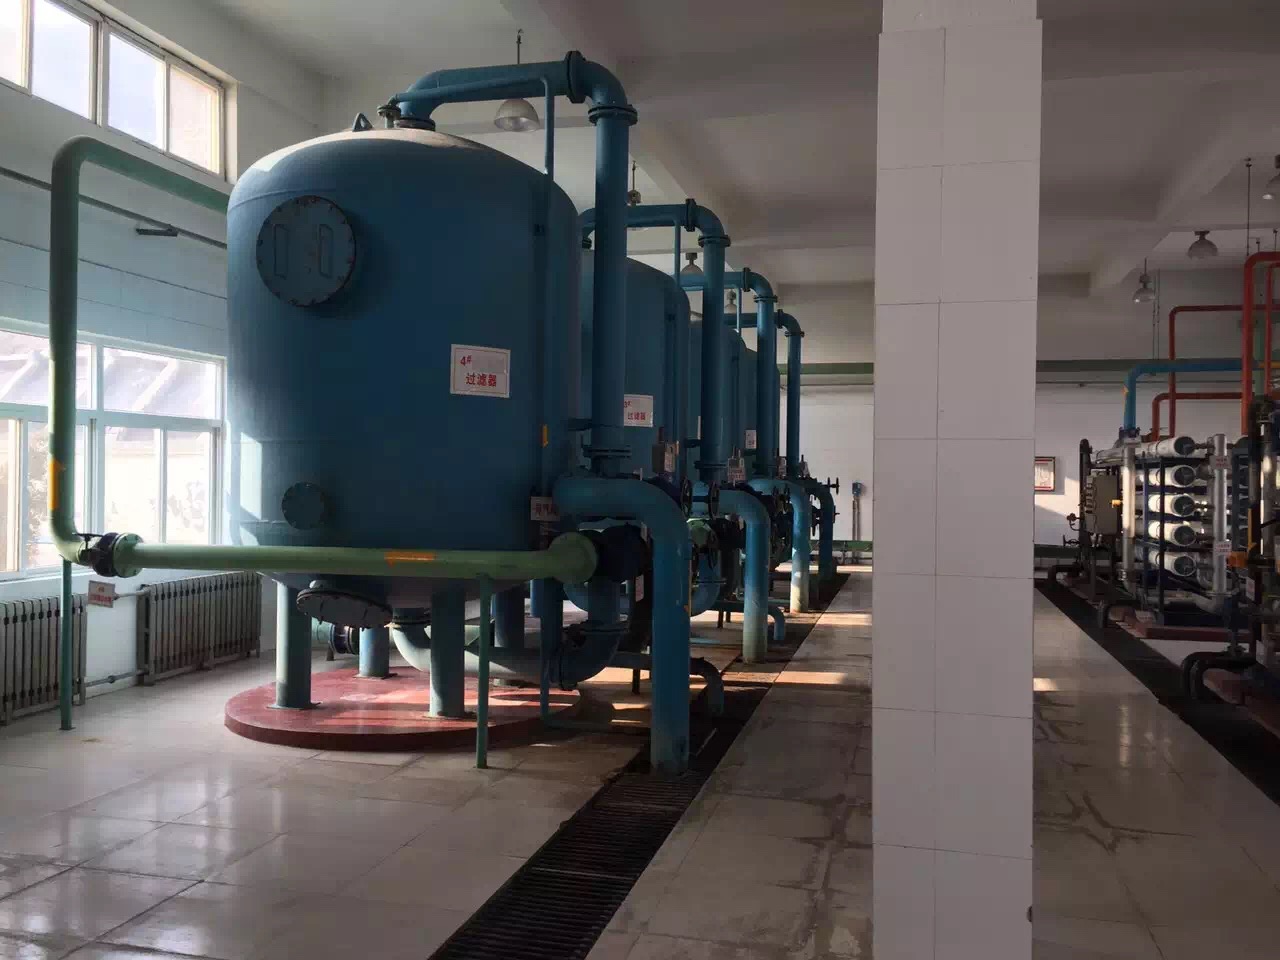 Comprar HCl Recycle Ion Exchanger,HCl Recycle Ion Exchanger Preço,HCl Recycle Ion Exchanger   Marcas,HCl Recycle Ion Exchanger Fabricante,HCl Recycle Ion Exchanger Mercado,HCl Recycle Ion Exchanger Companhia,